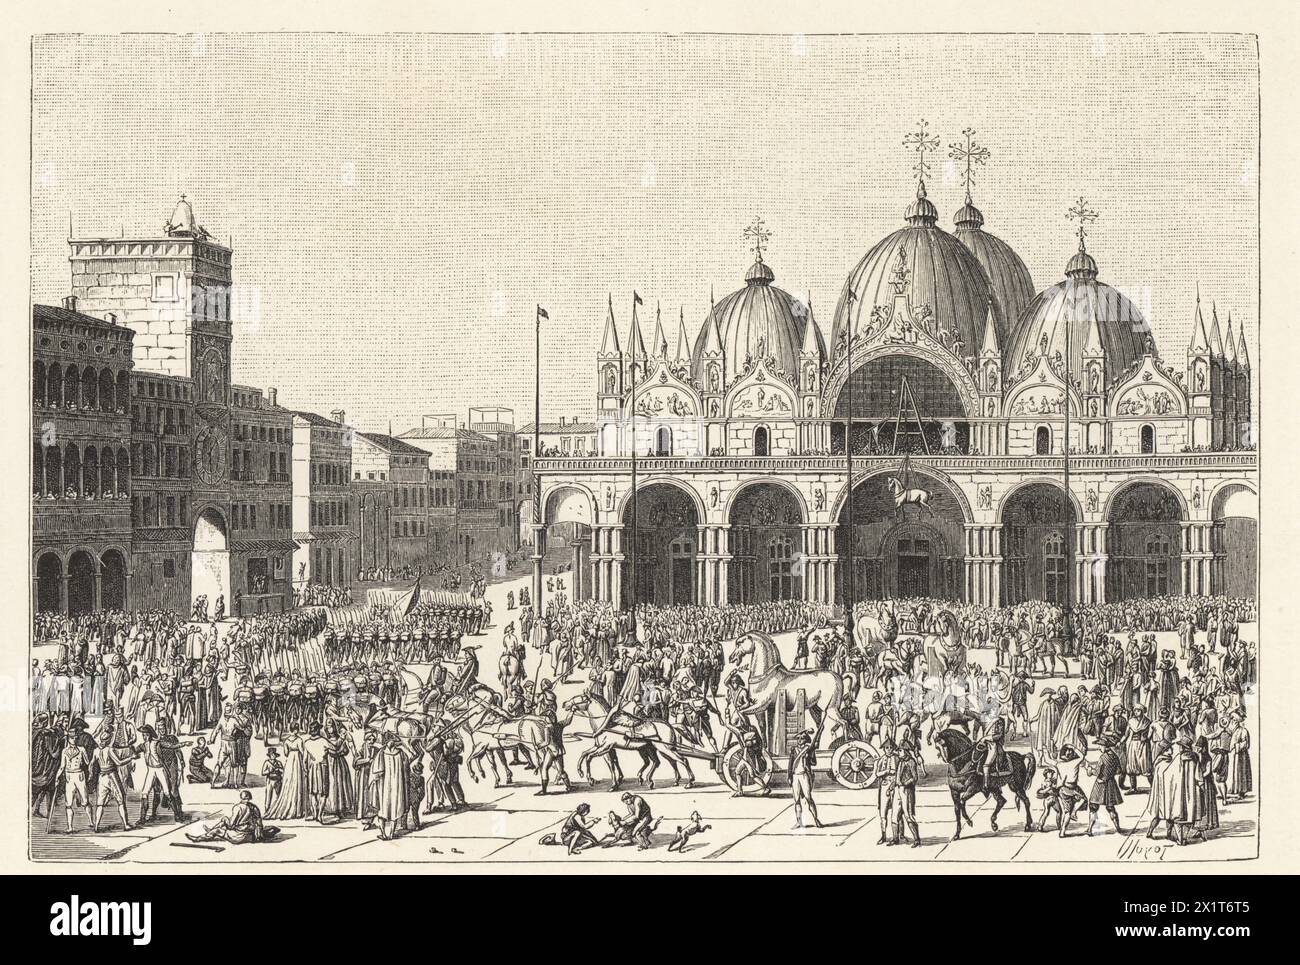 Napoleon's trooping looting the bronze horses from Saint Mark's Square, Venice, after the Italian Campaign, 1797. Enlevement des chevaux de Saint-Marc. Woodcut by Huyot after an illustration by Jean Duplessis-Bertaux from Paul Lacroix's Directoire, Consulat et Empire, (Directory, Consulate and Empire), Paris, 1884. Stock Photo